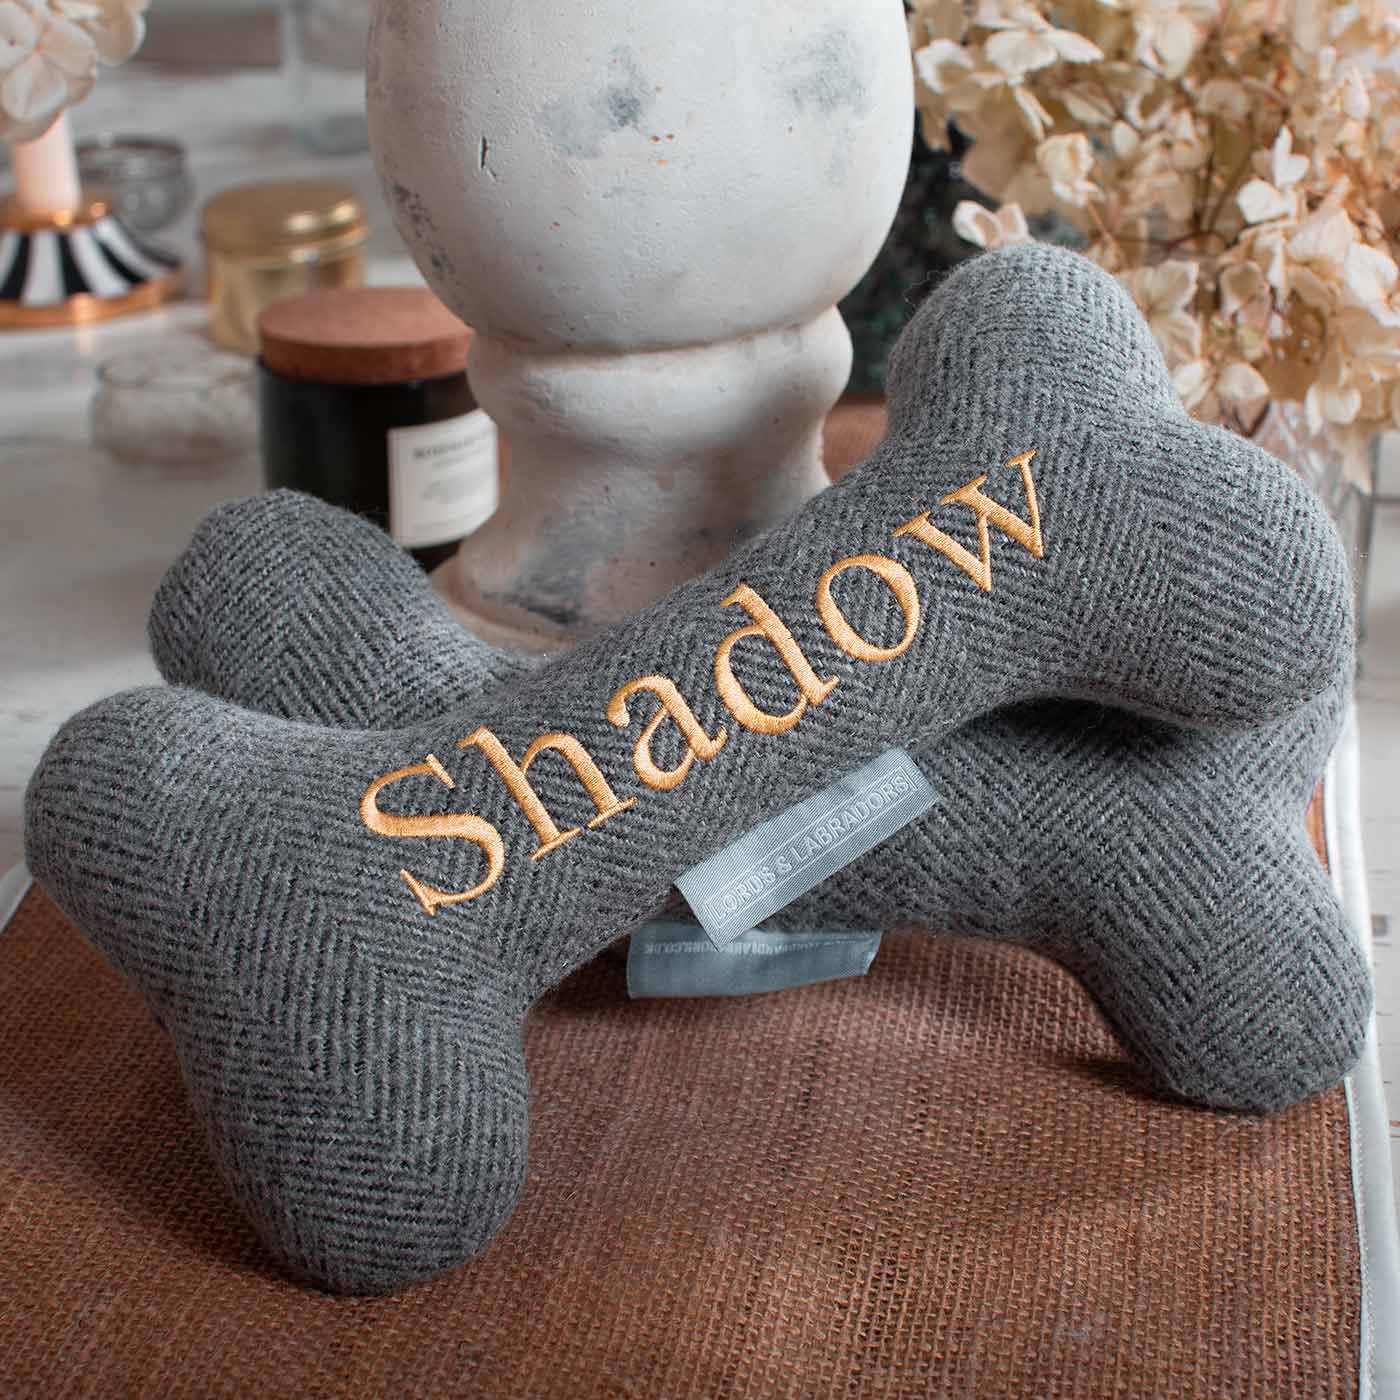 Present The Perfect Pet Playtime With Our Luxury Dog Bone Toy, In Stunning Pewter Herringbone Tweed! Available To Personalize Now at Lords & Labradors US